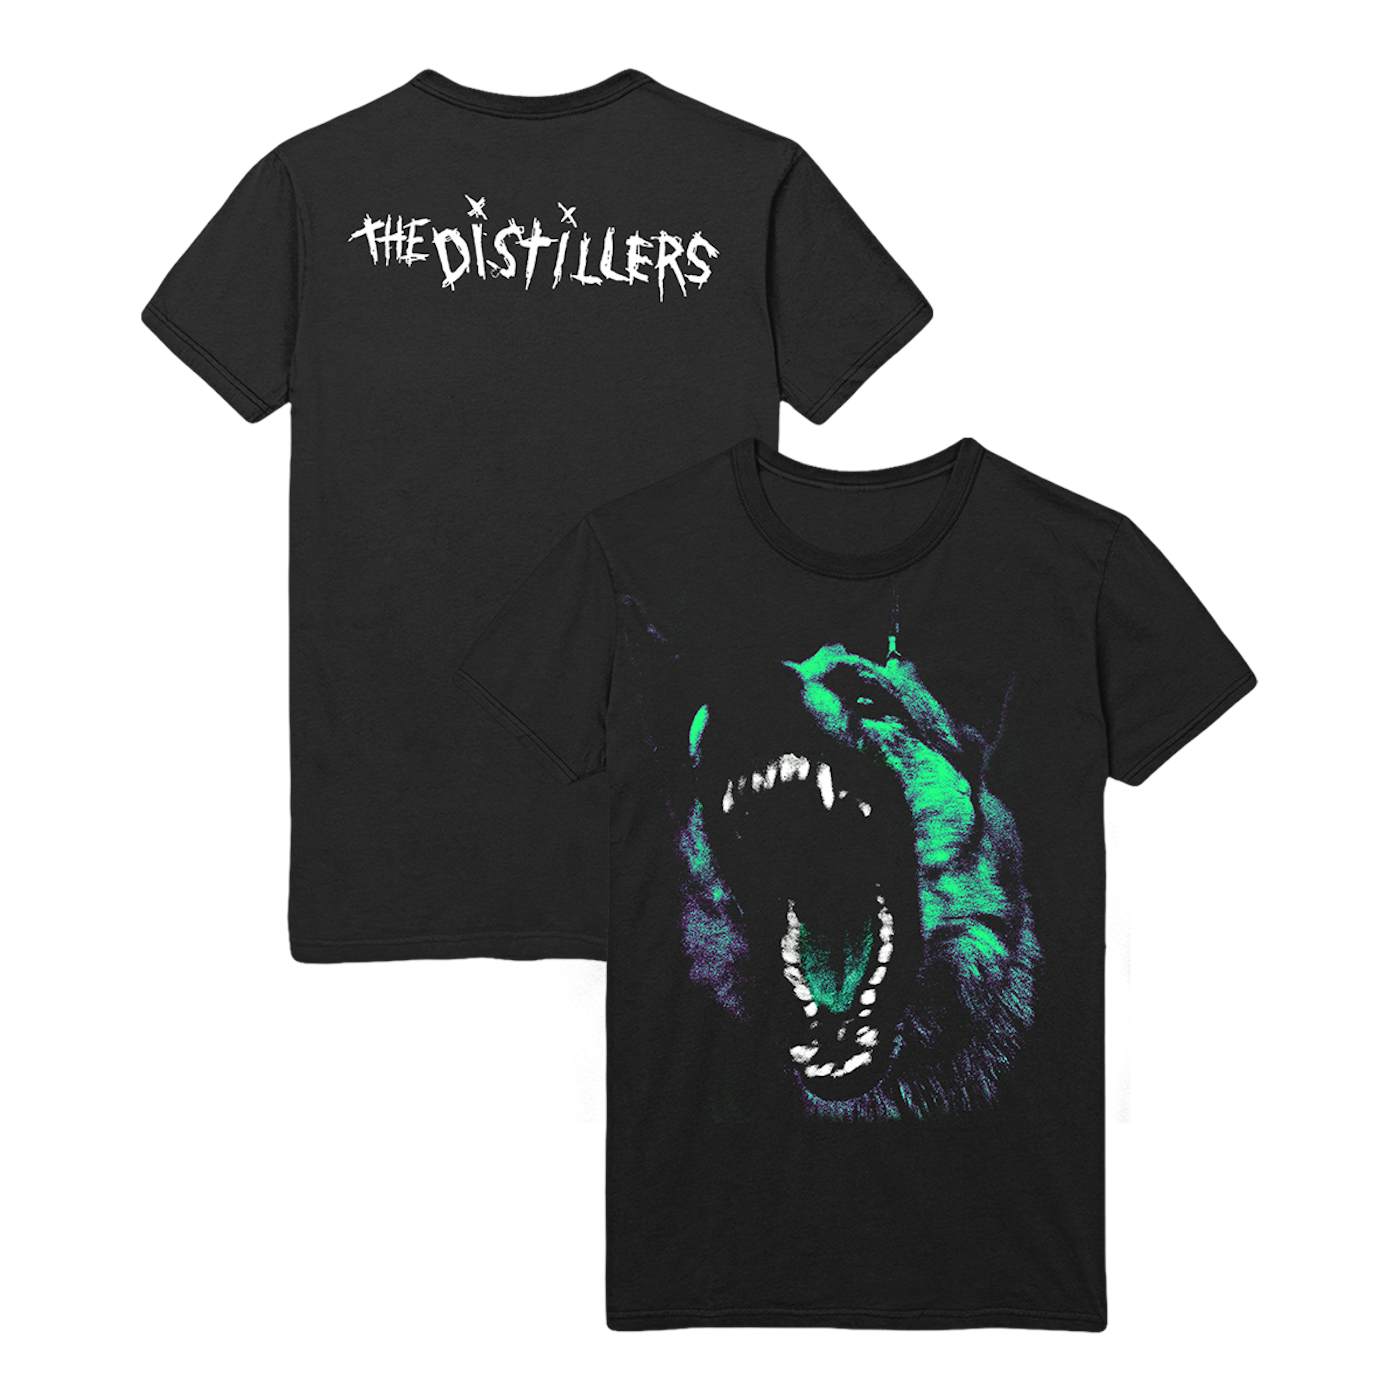 The Distillers - 20th Anniversary Self-Titled Tee